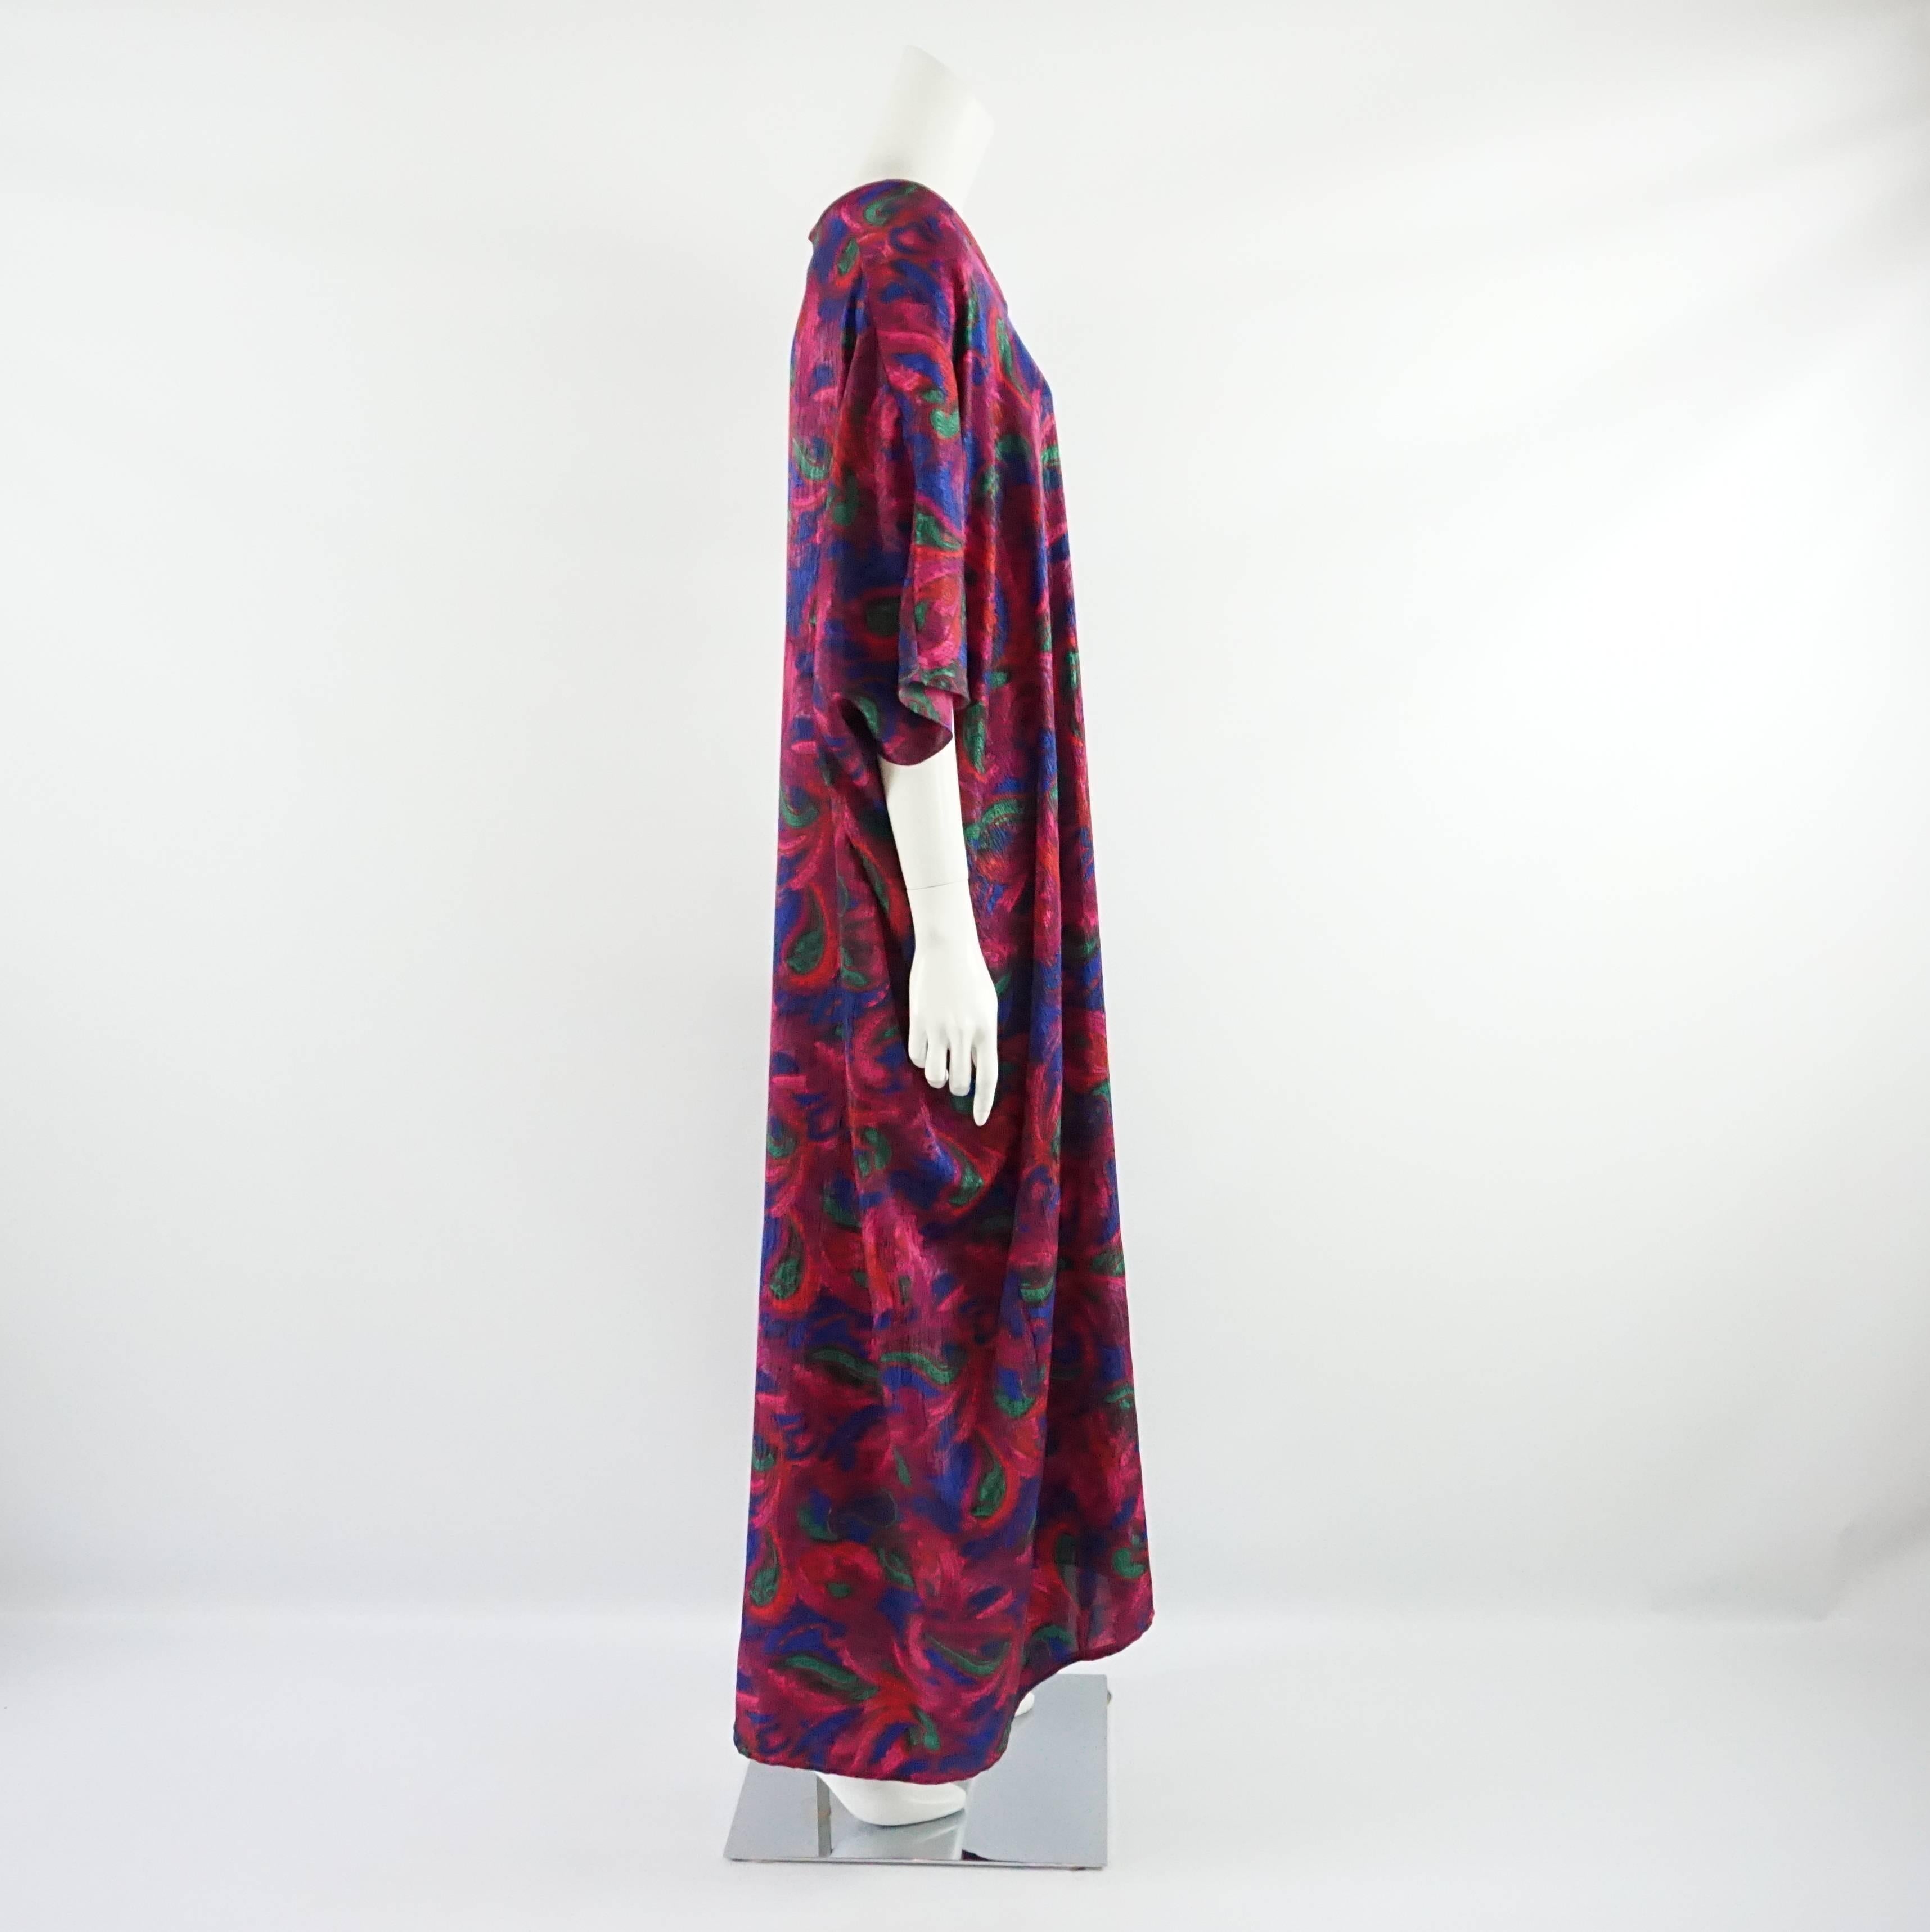 This Oscar de la Renta silk caftan features a v-neck and a multi-colored printed design. It is very loose and in excellent condition. Circa 1970's. 

Measurements
Sleeve Length: about 23.5"
Length: about 54.5"